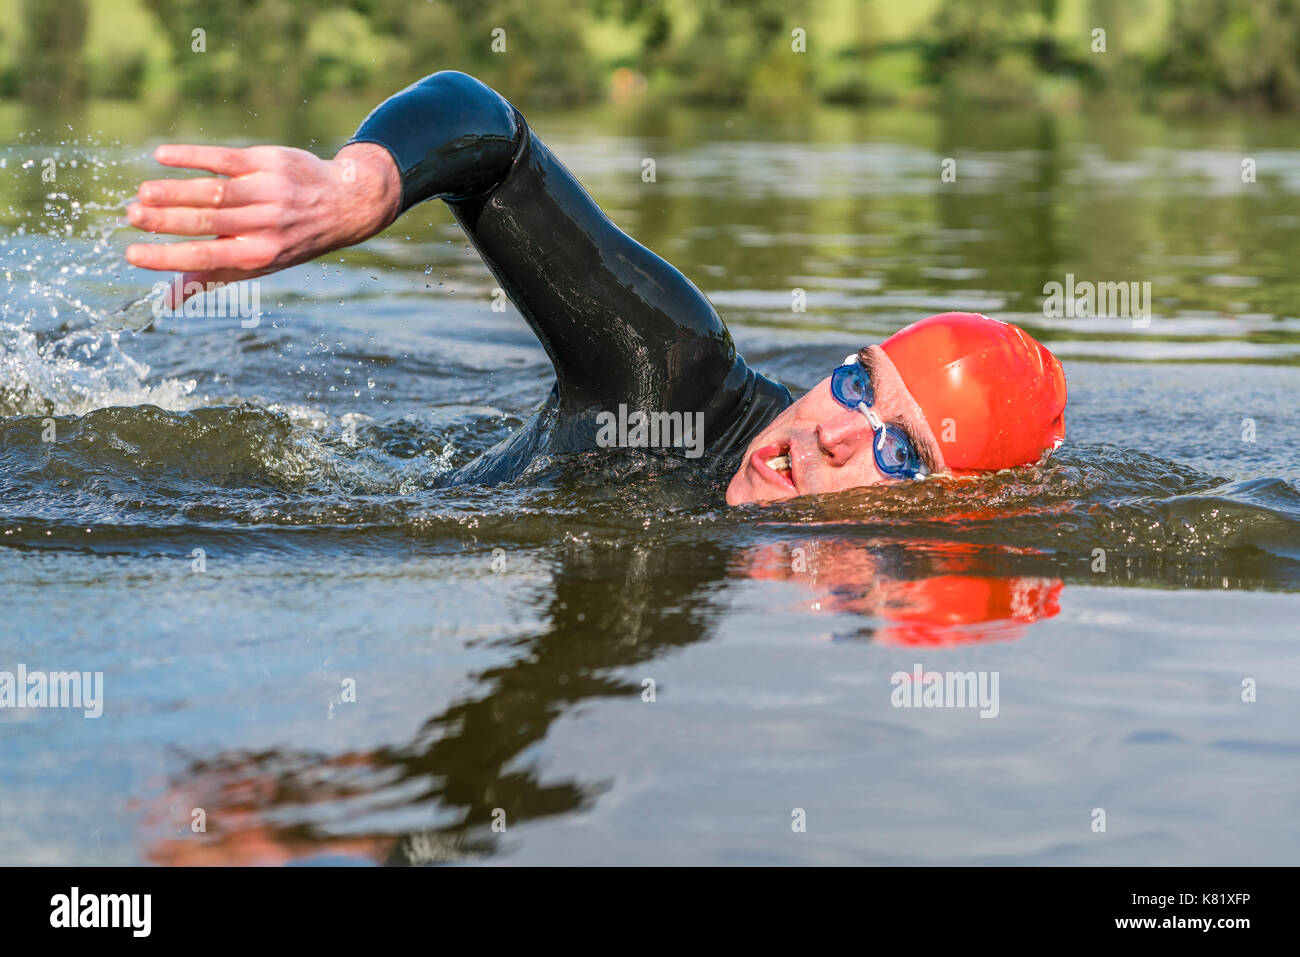 Man, 39 years old, wearing a wetsuit, swimming in the lake, Aichstruter Stausee, Baden-Württemberg, Germany Stock Photo